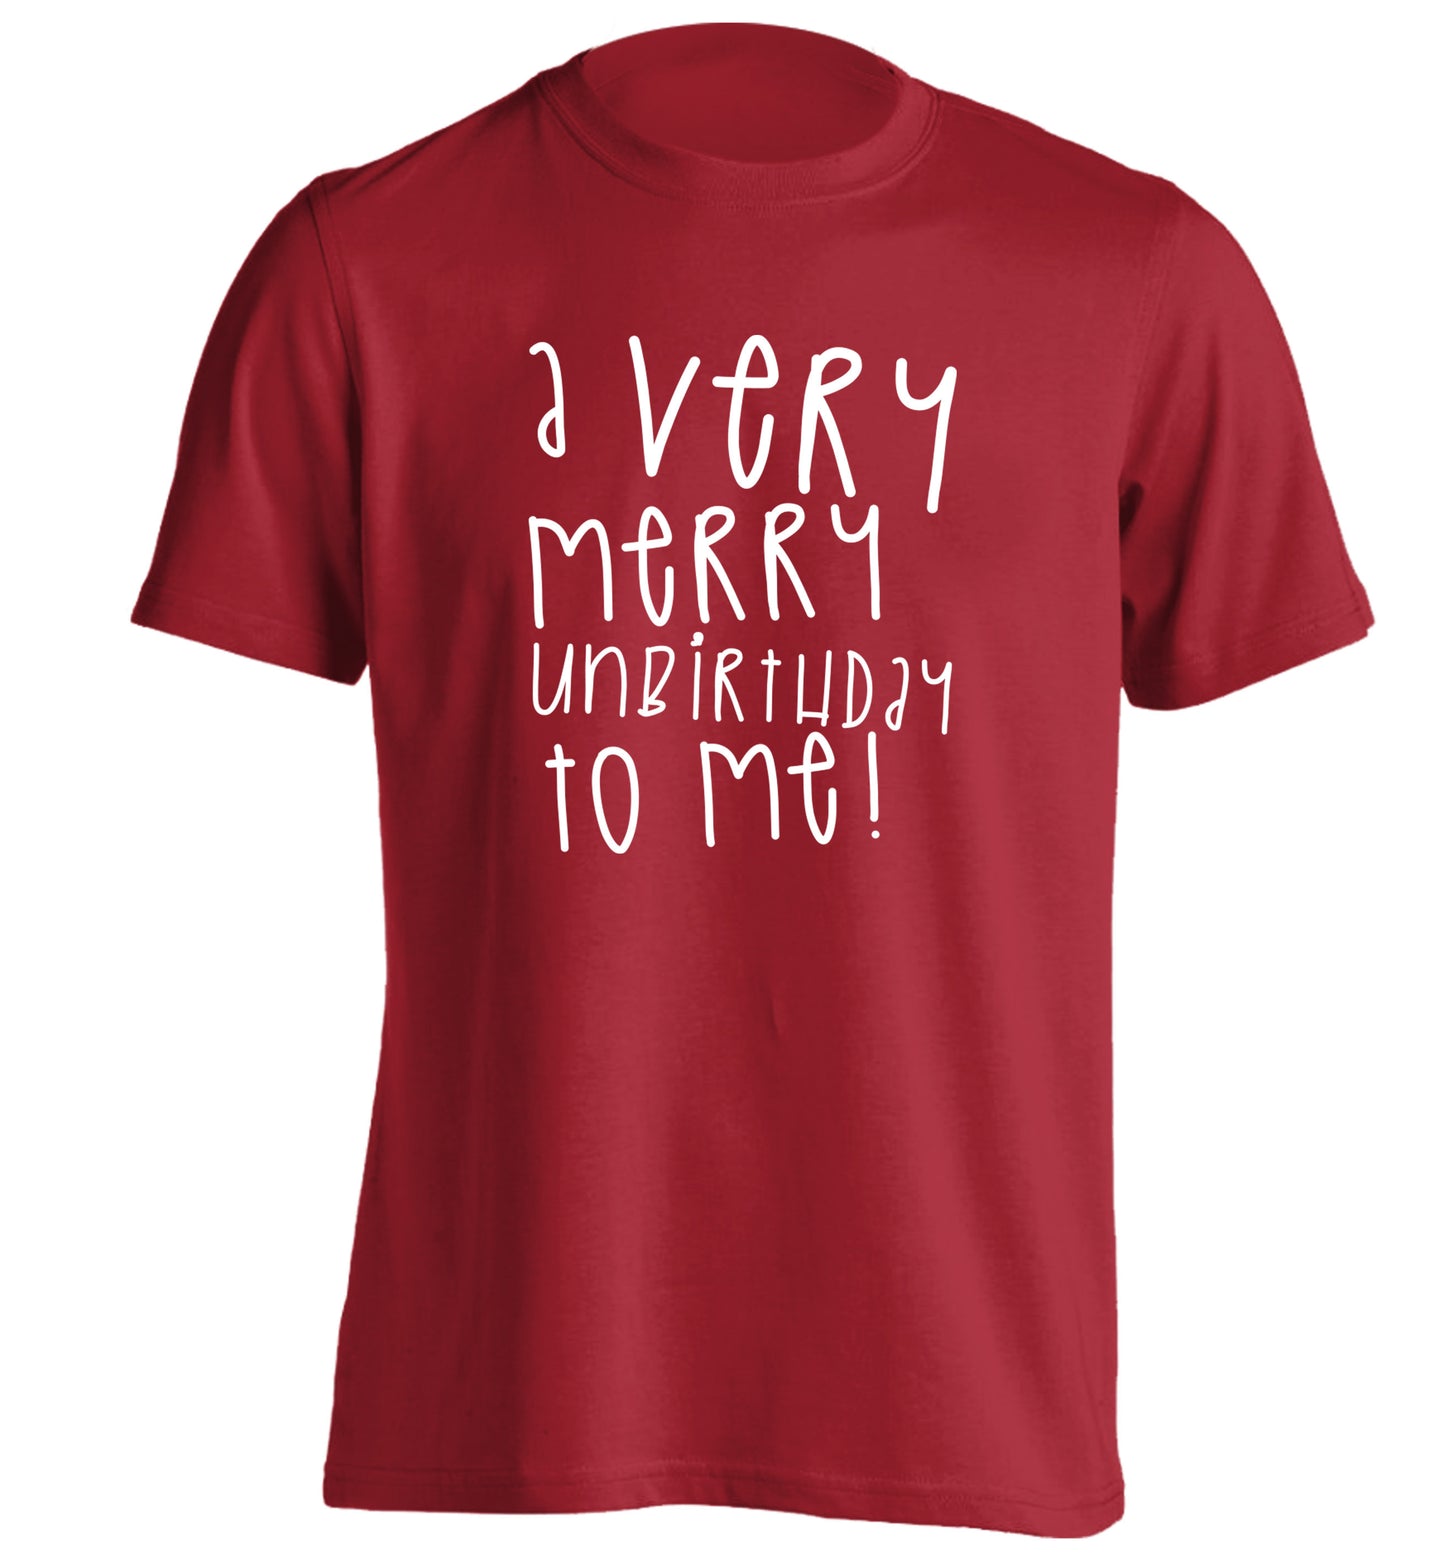 A very merry unbirthday to me! adults unisex red Tshirt 2XL